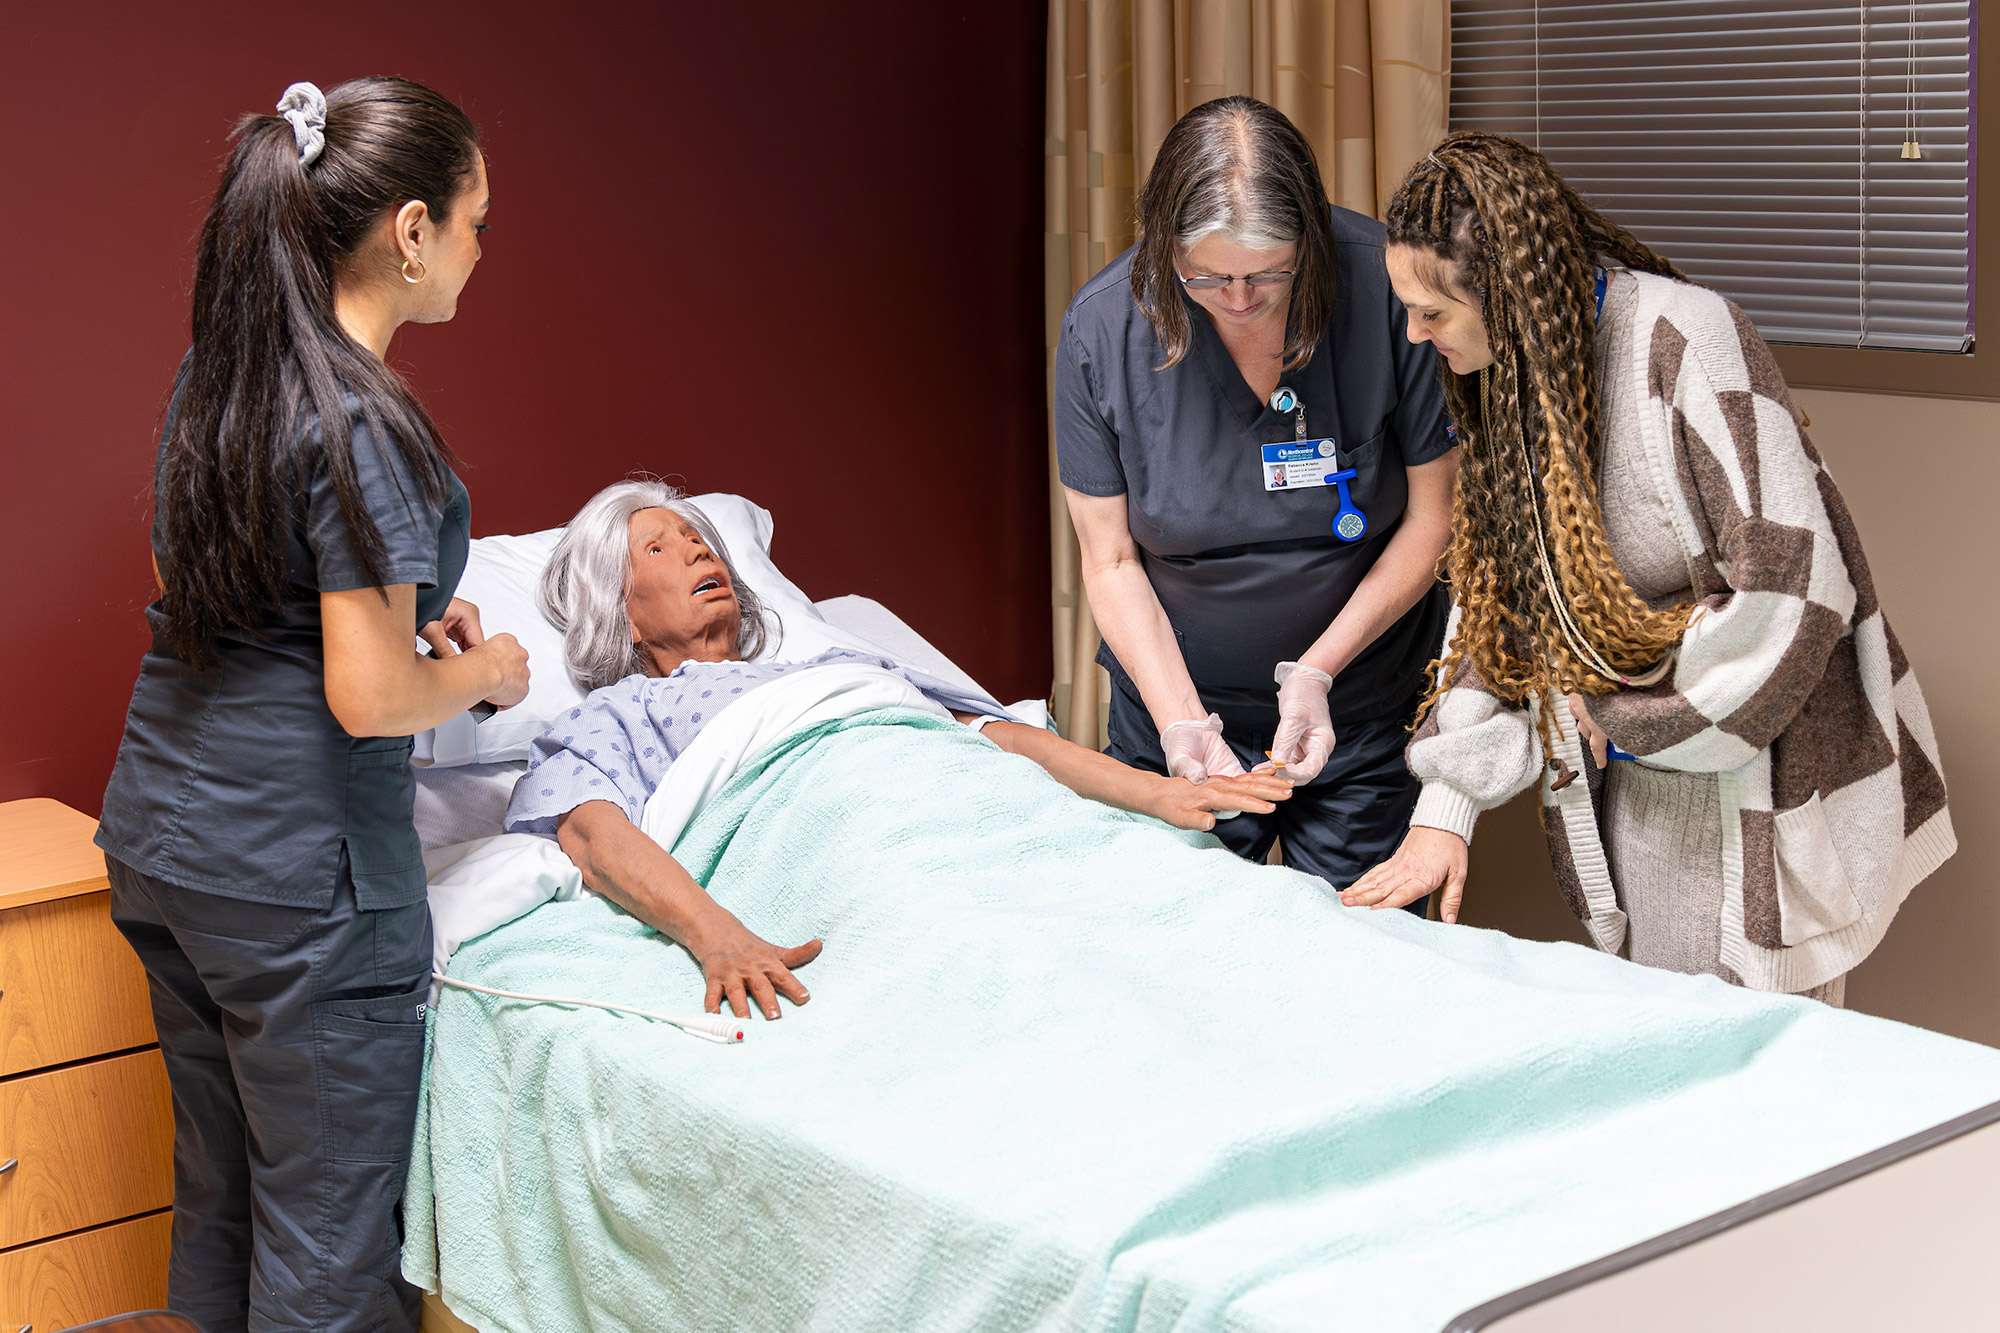 Two Certified Nursing Assistants watch how a different CNA files nails using an elderly mannequin.